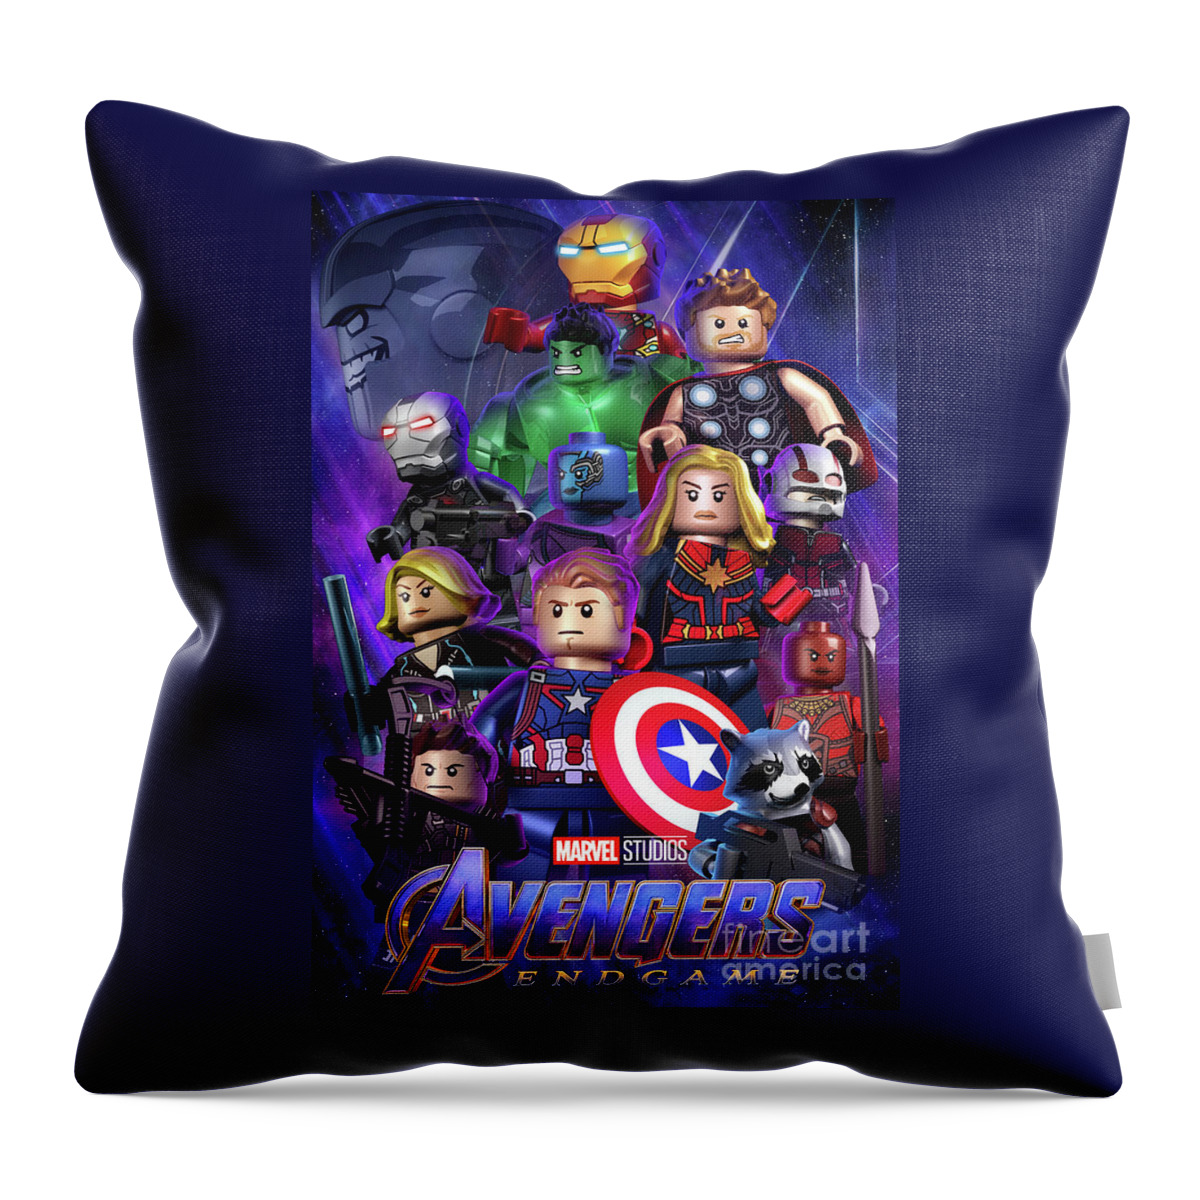 The Avengers Throw Pillow featuring the digital art Lego Avengers Endgame poster by Mike Napolitan